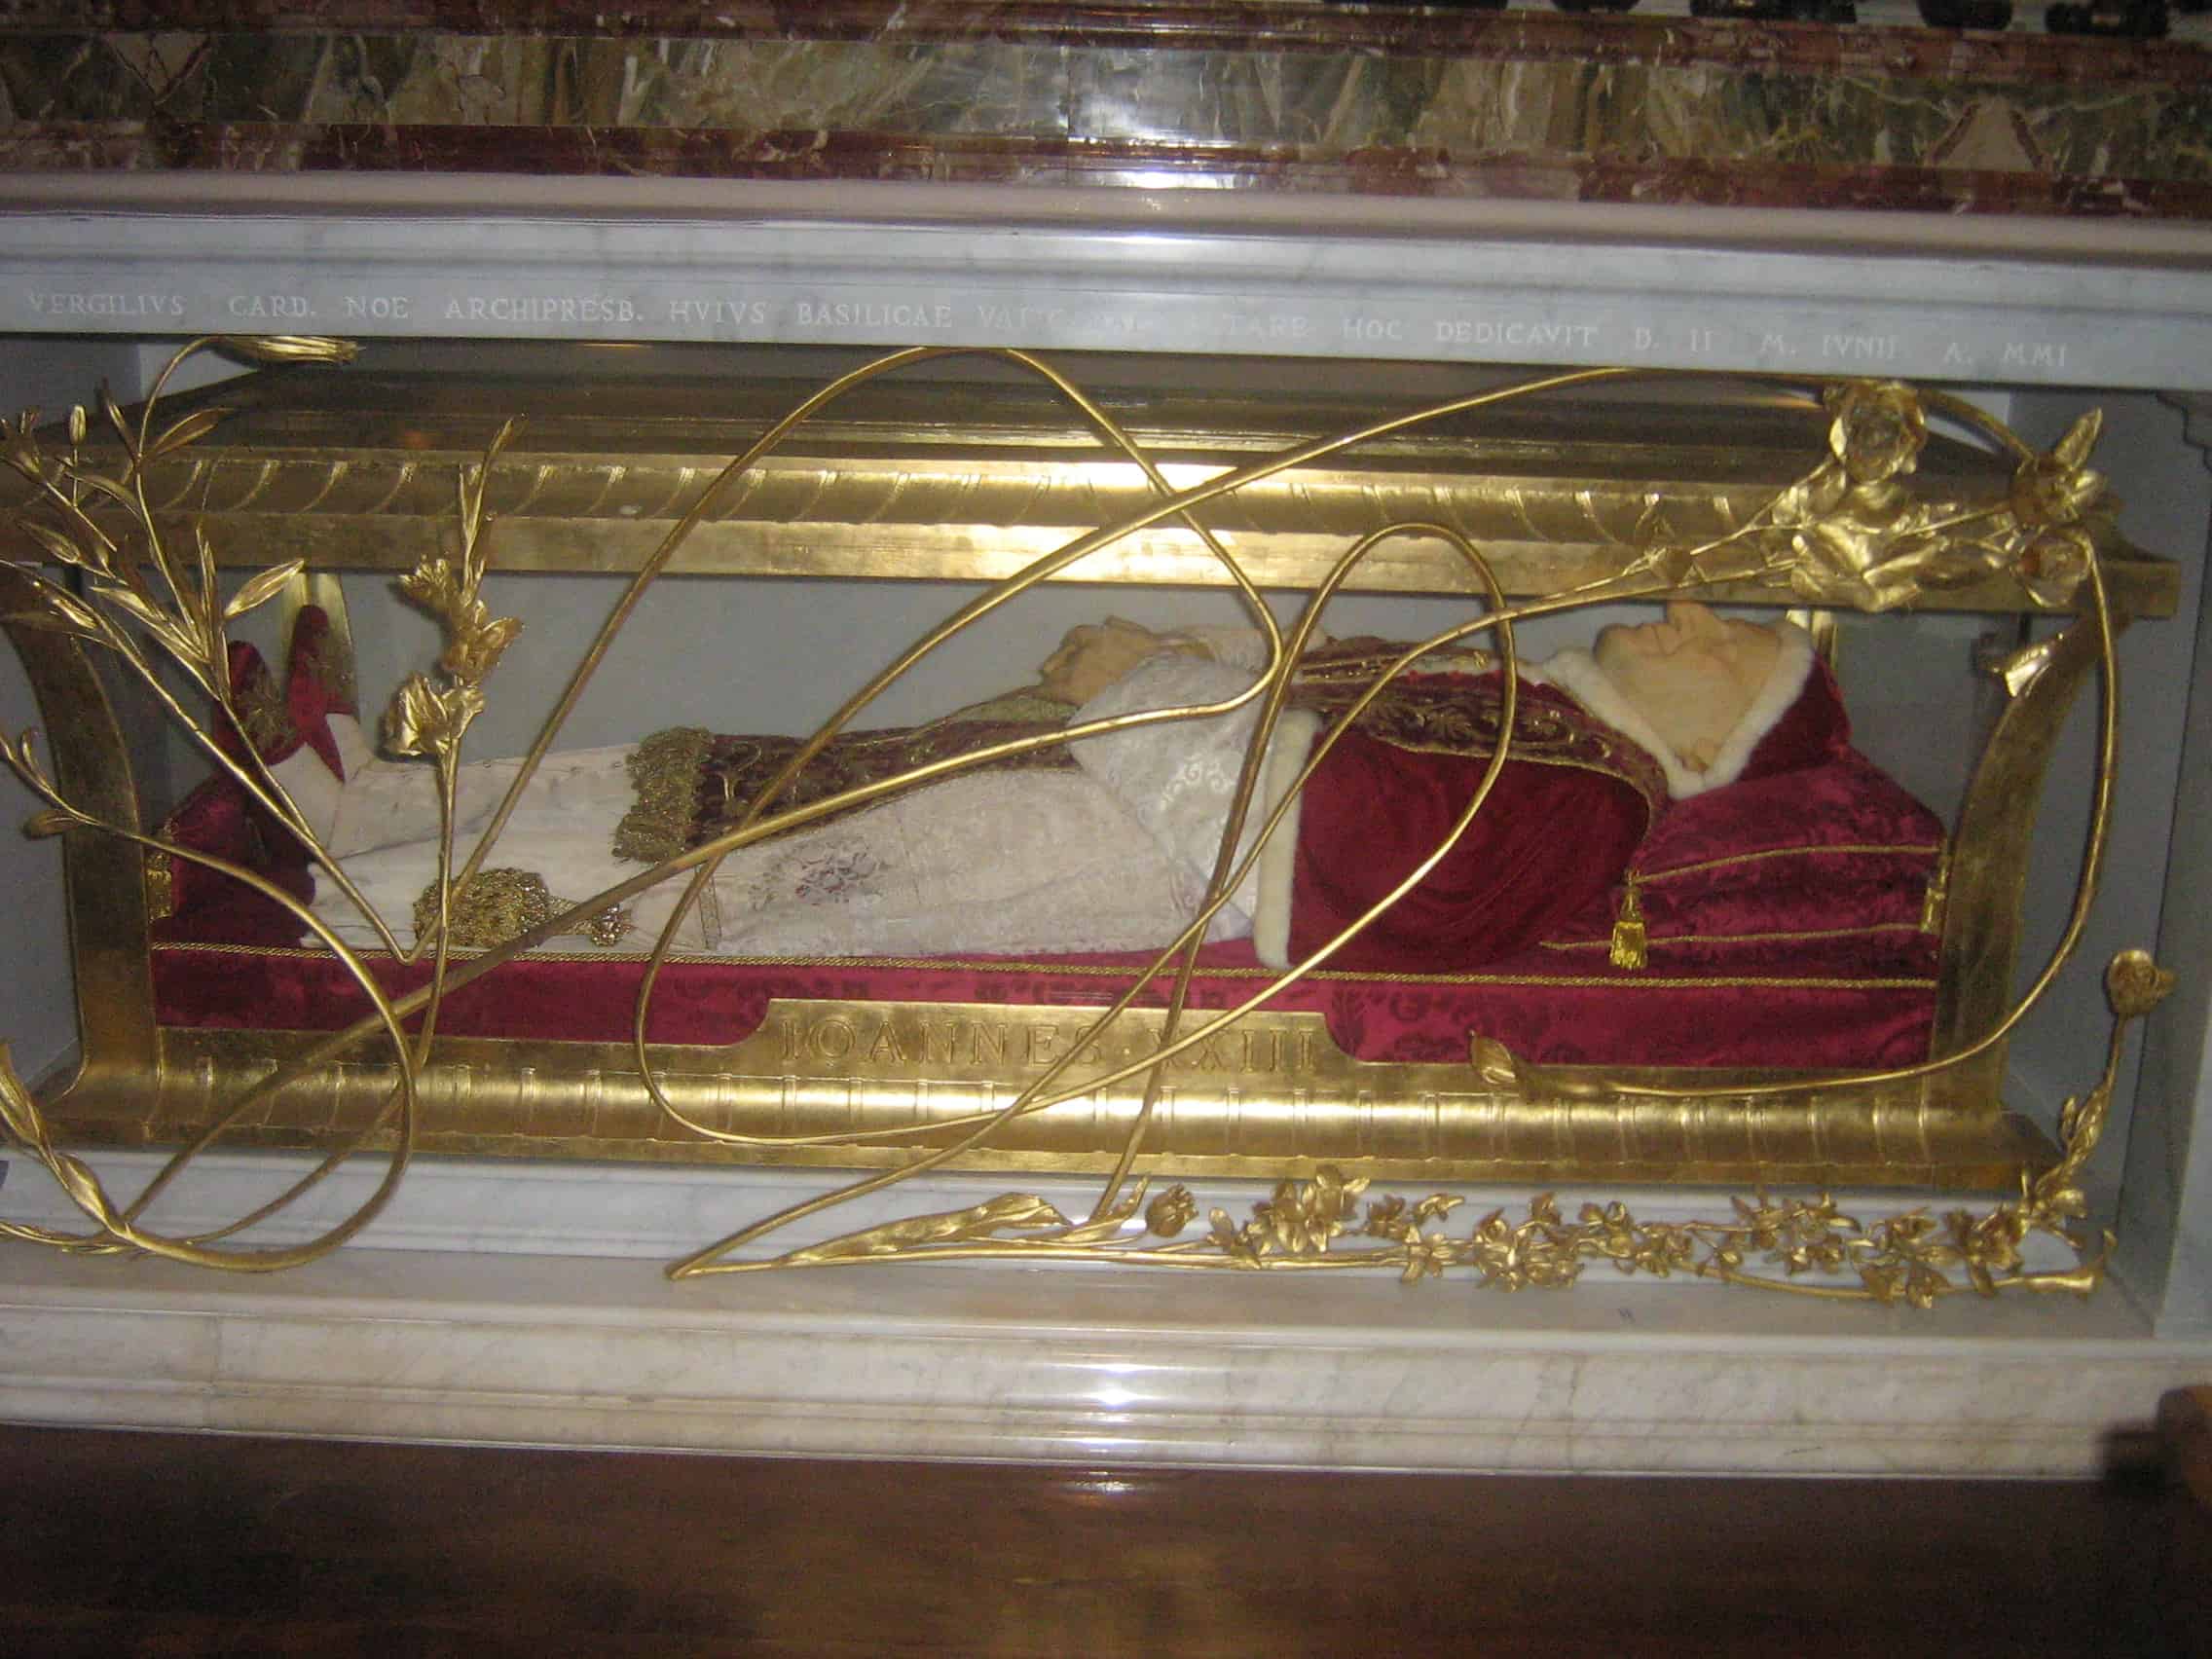 Body of John XXIII at St. Jerome Altar in St. Peters — By Patnac (Own work) via Wikimedia Commons